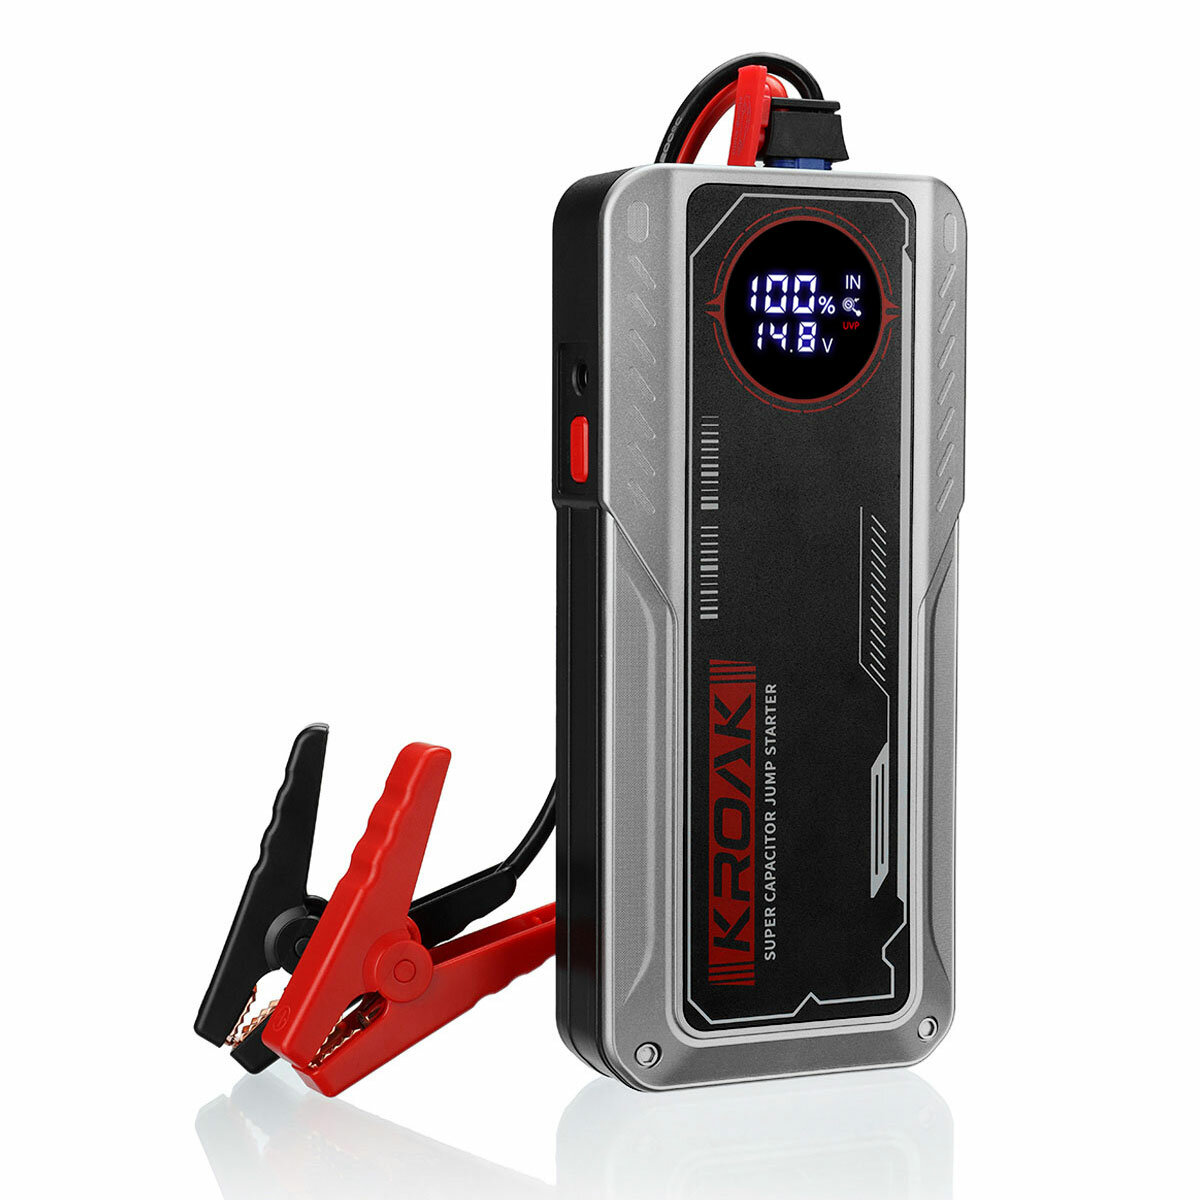 Image of KROAK S320 1200A 400F Super Capacitor Jump Starter 12V Portable Car Jumper Emergency Battery Booster with Carrying Case